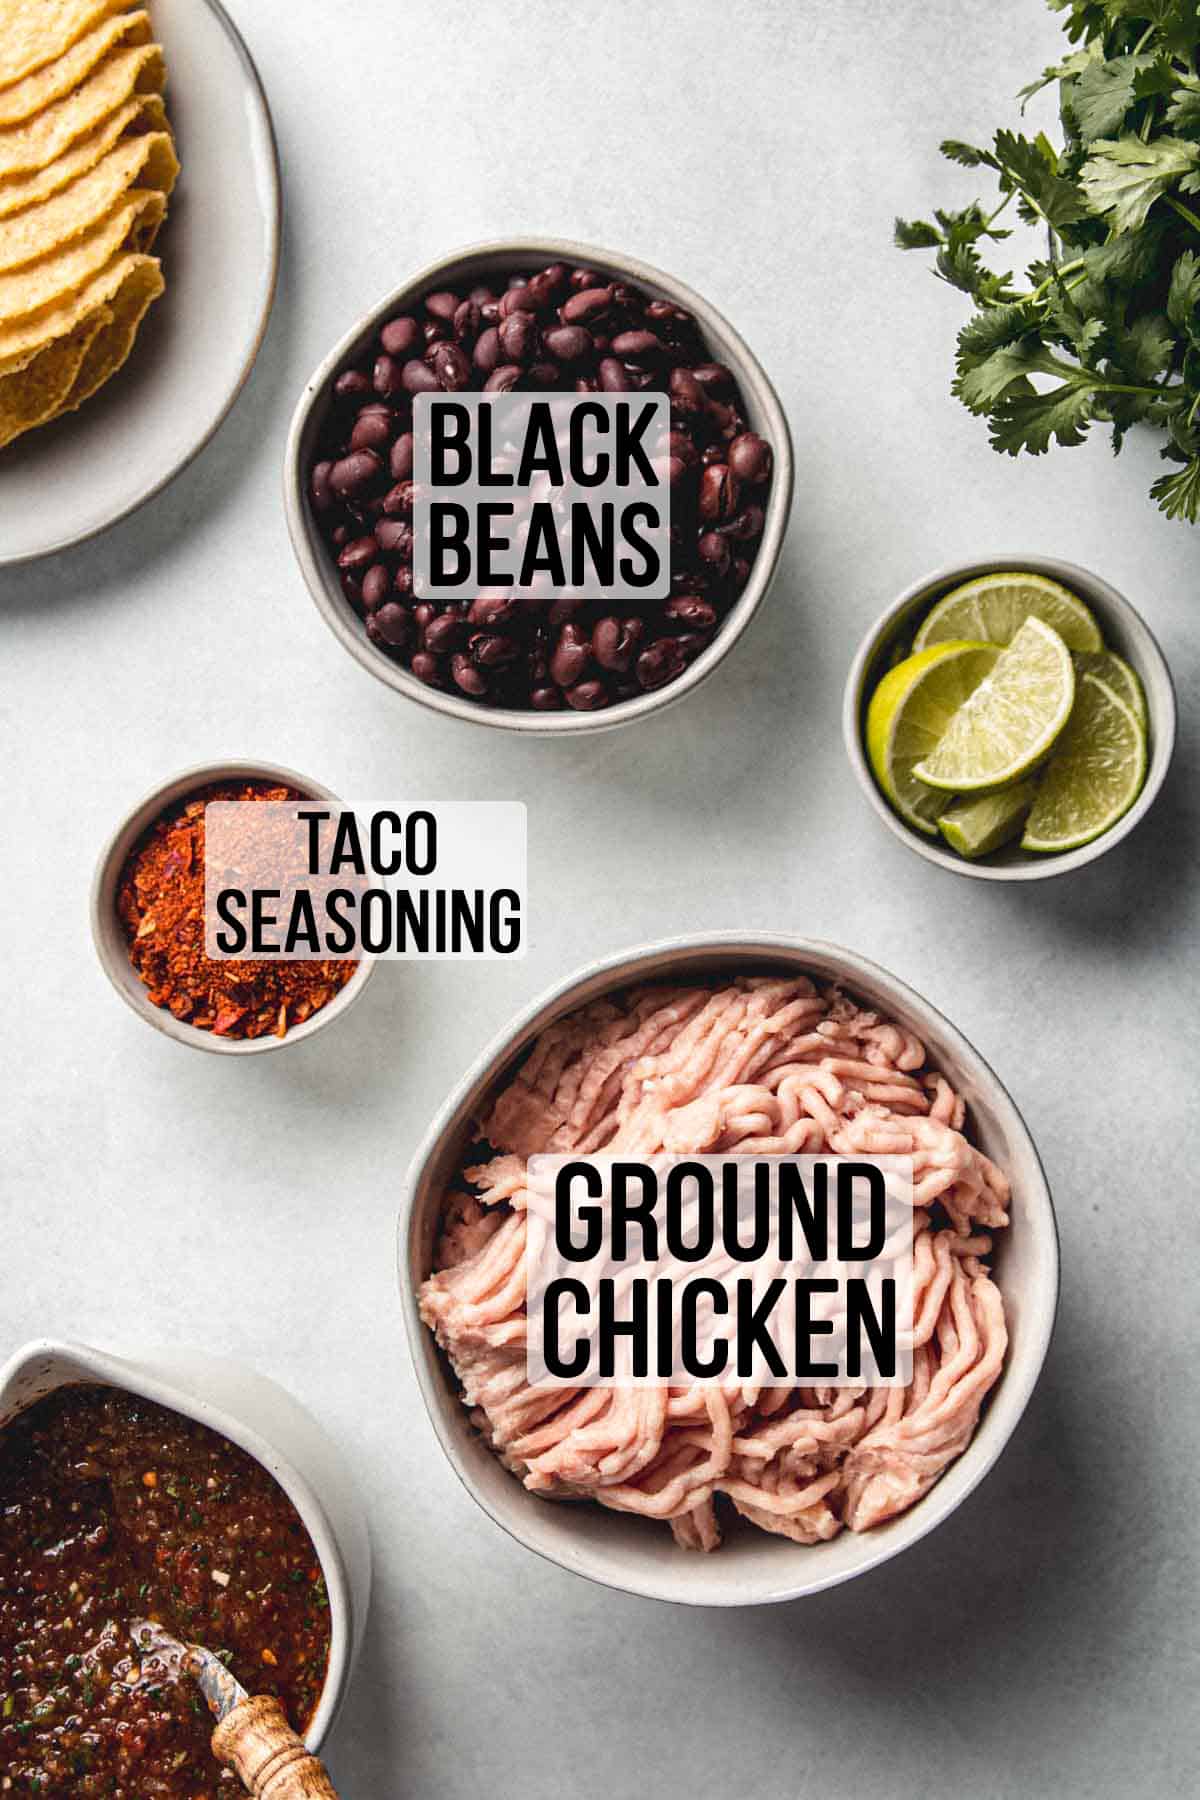 Ground chicken, black beans, and taco seasoning measured out in bowls.